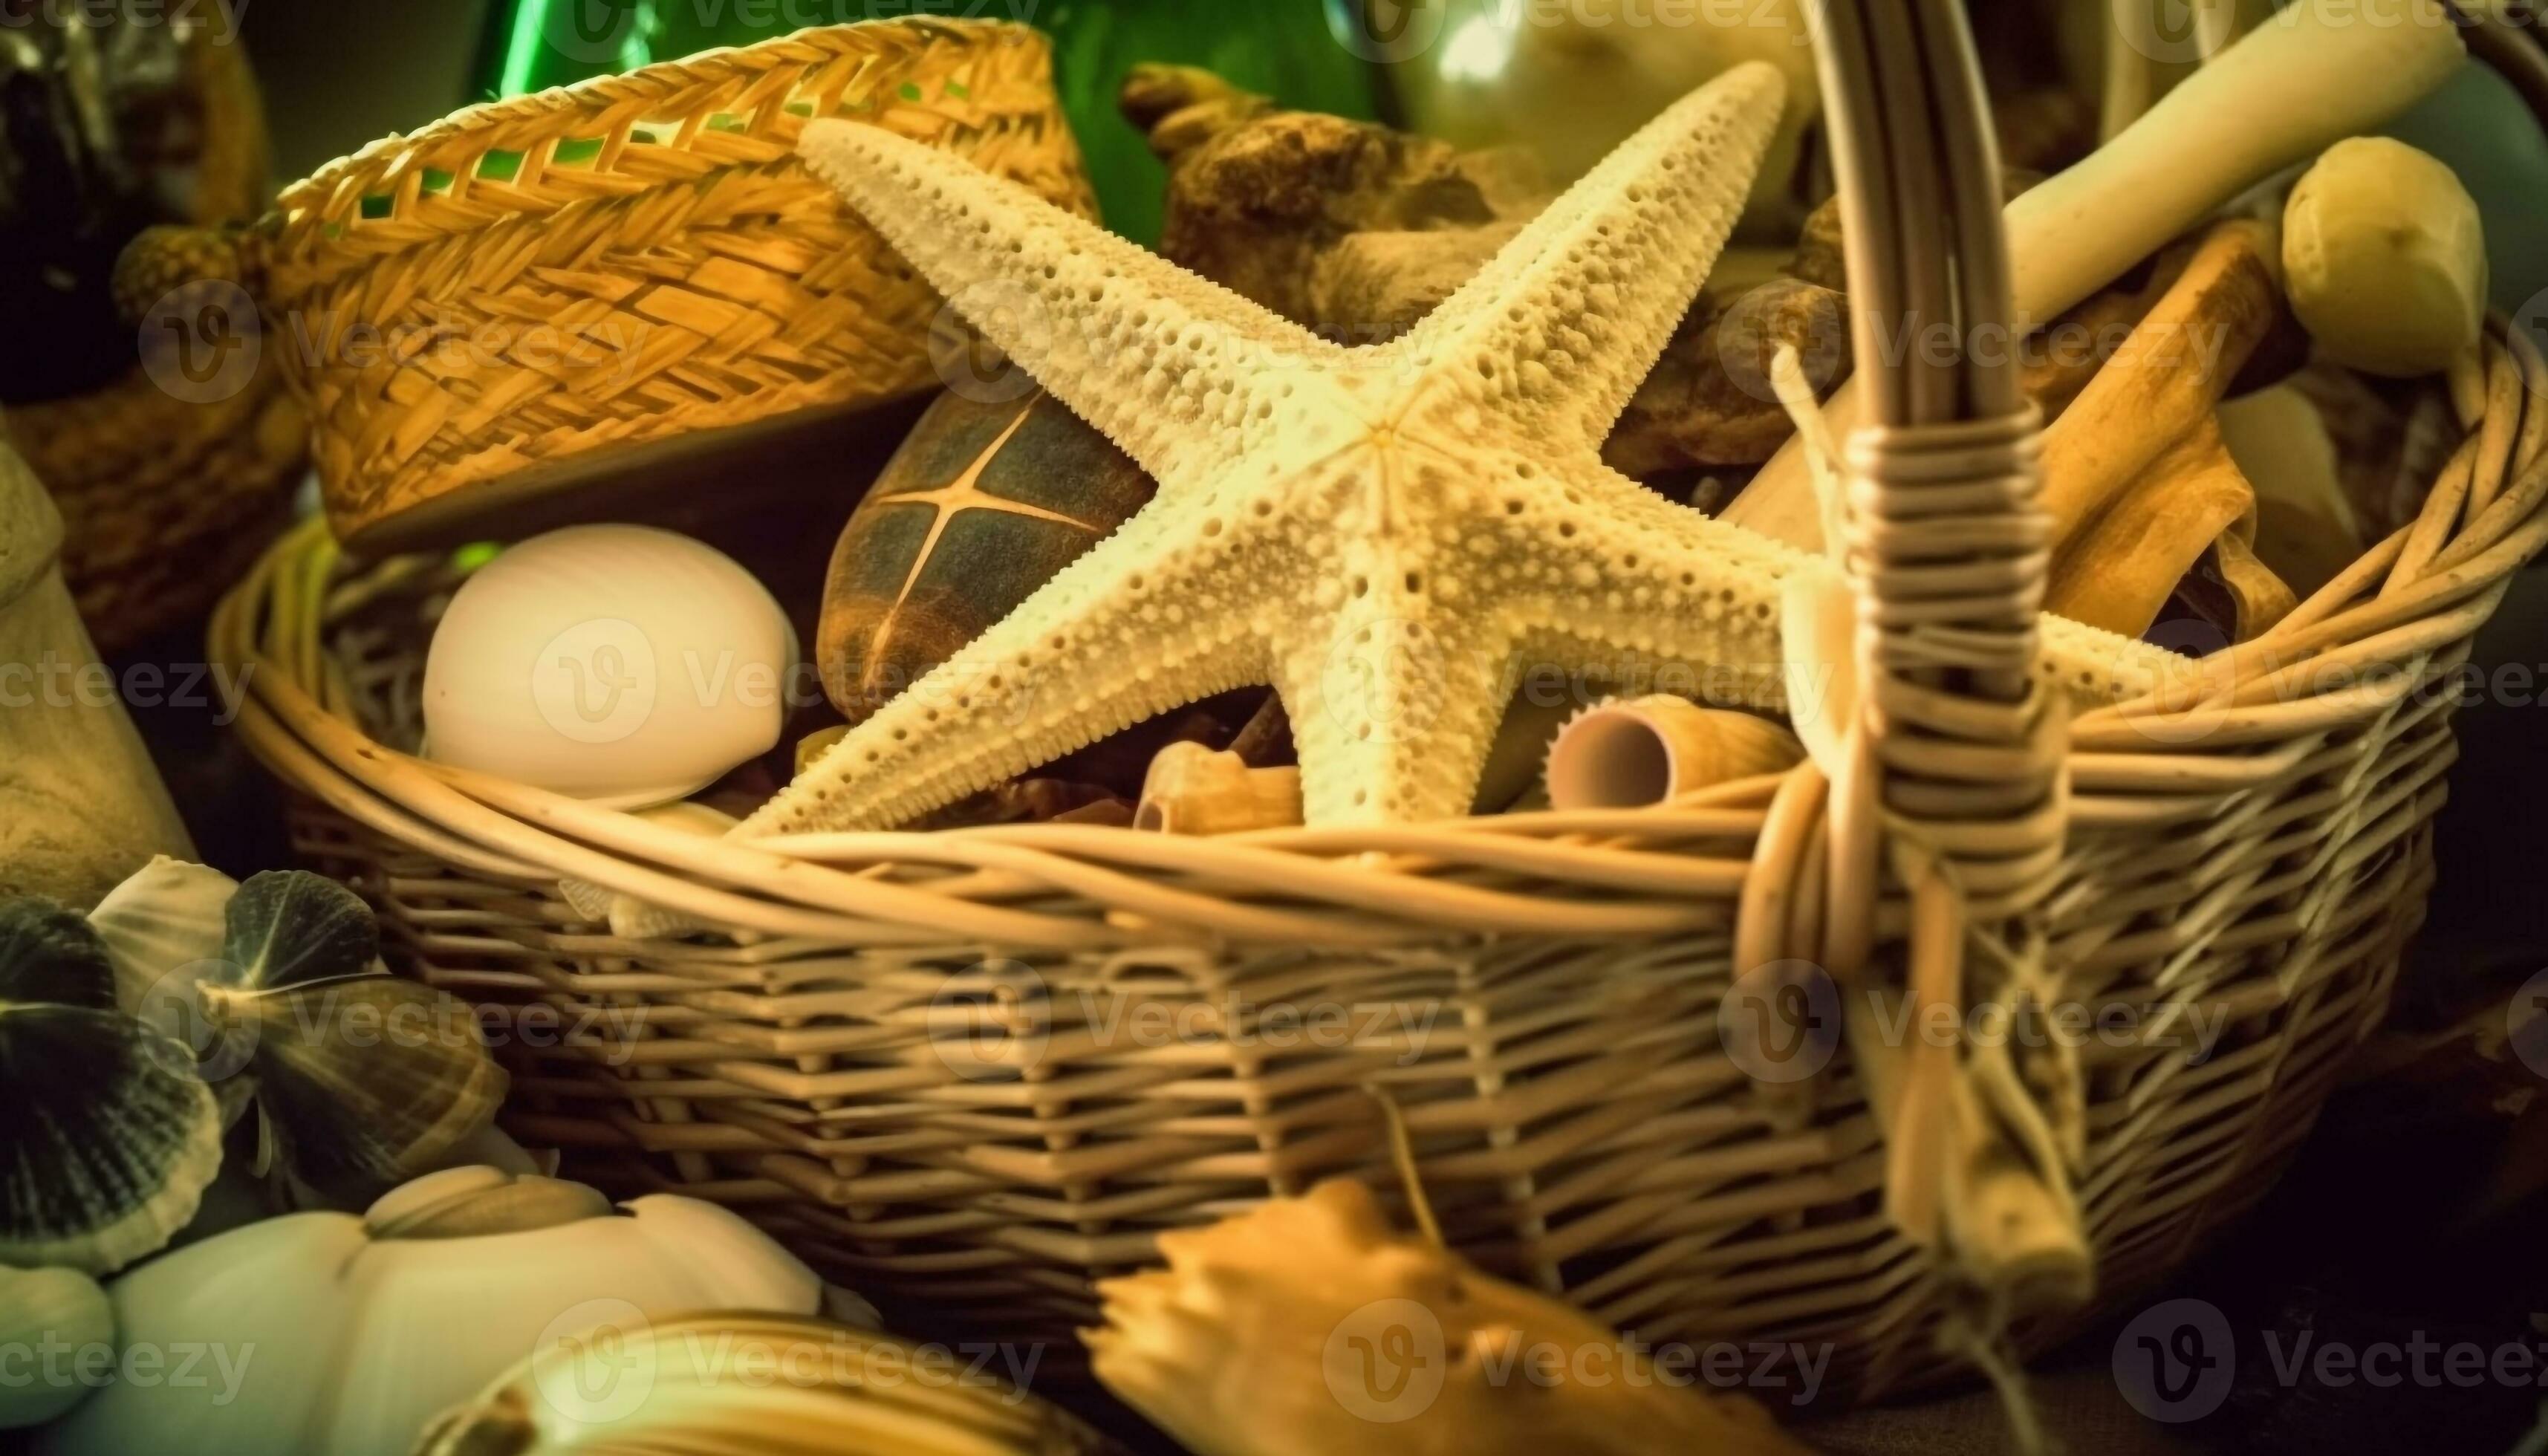 Colorful seashell collection decorates wicker basket for beach